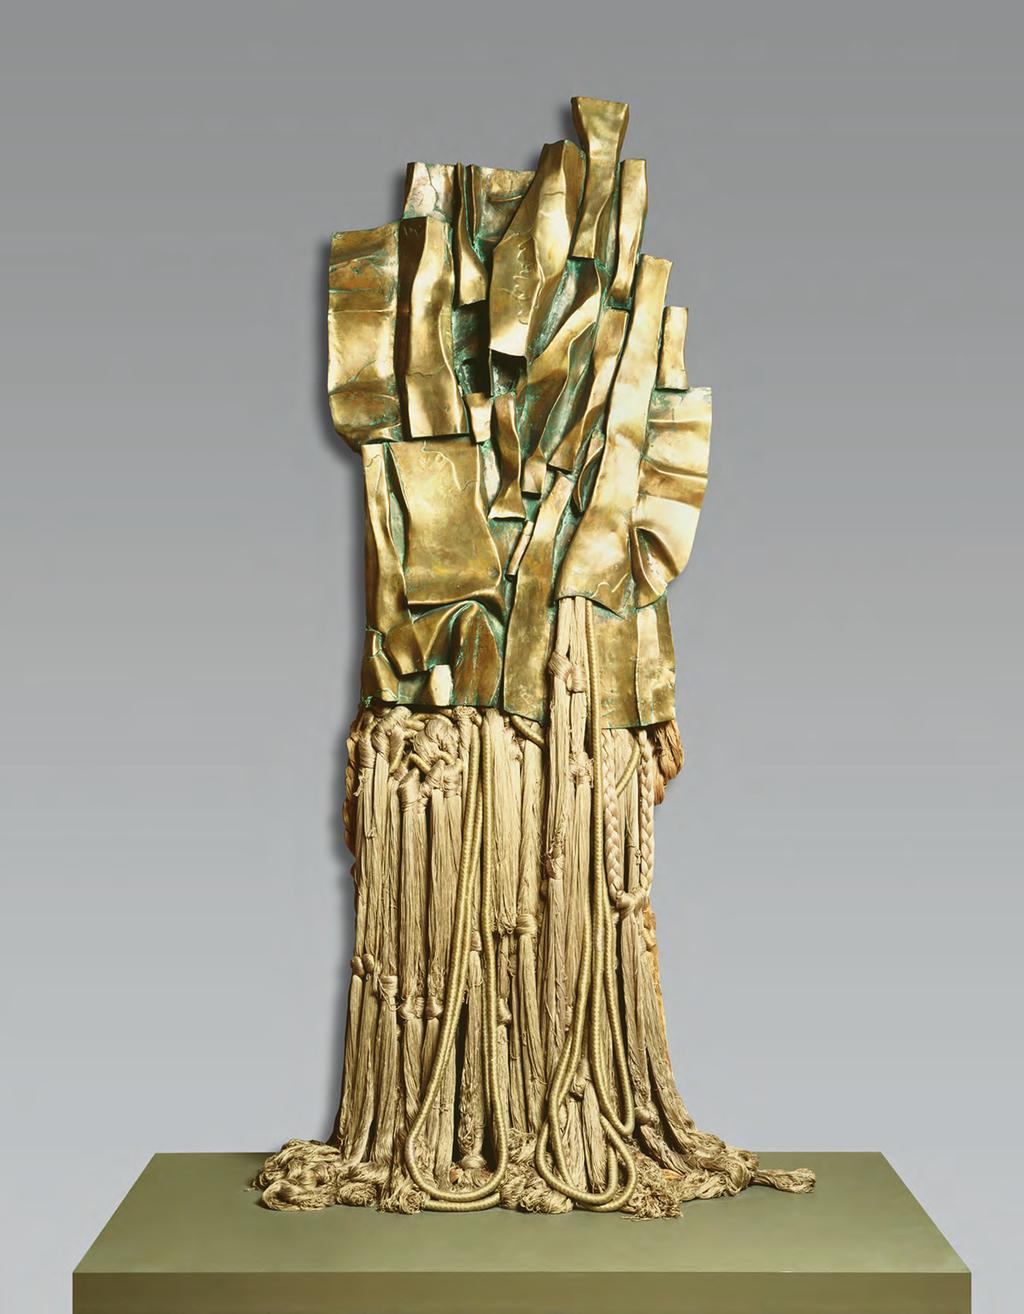 Barbara Chase-Riboud: Malcolm X #3, 1969, polished bronze, rayon and cotton, 102½ by 37 by 32 Courtesy Philadelphia Museum of Art.